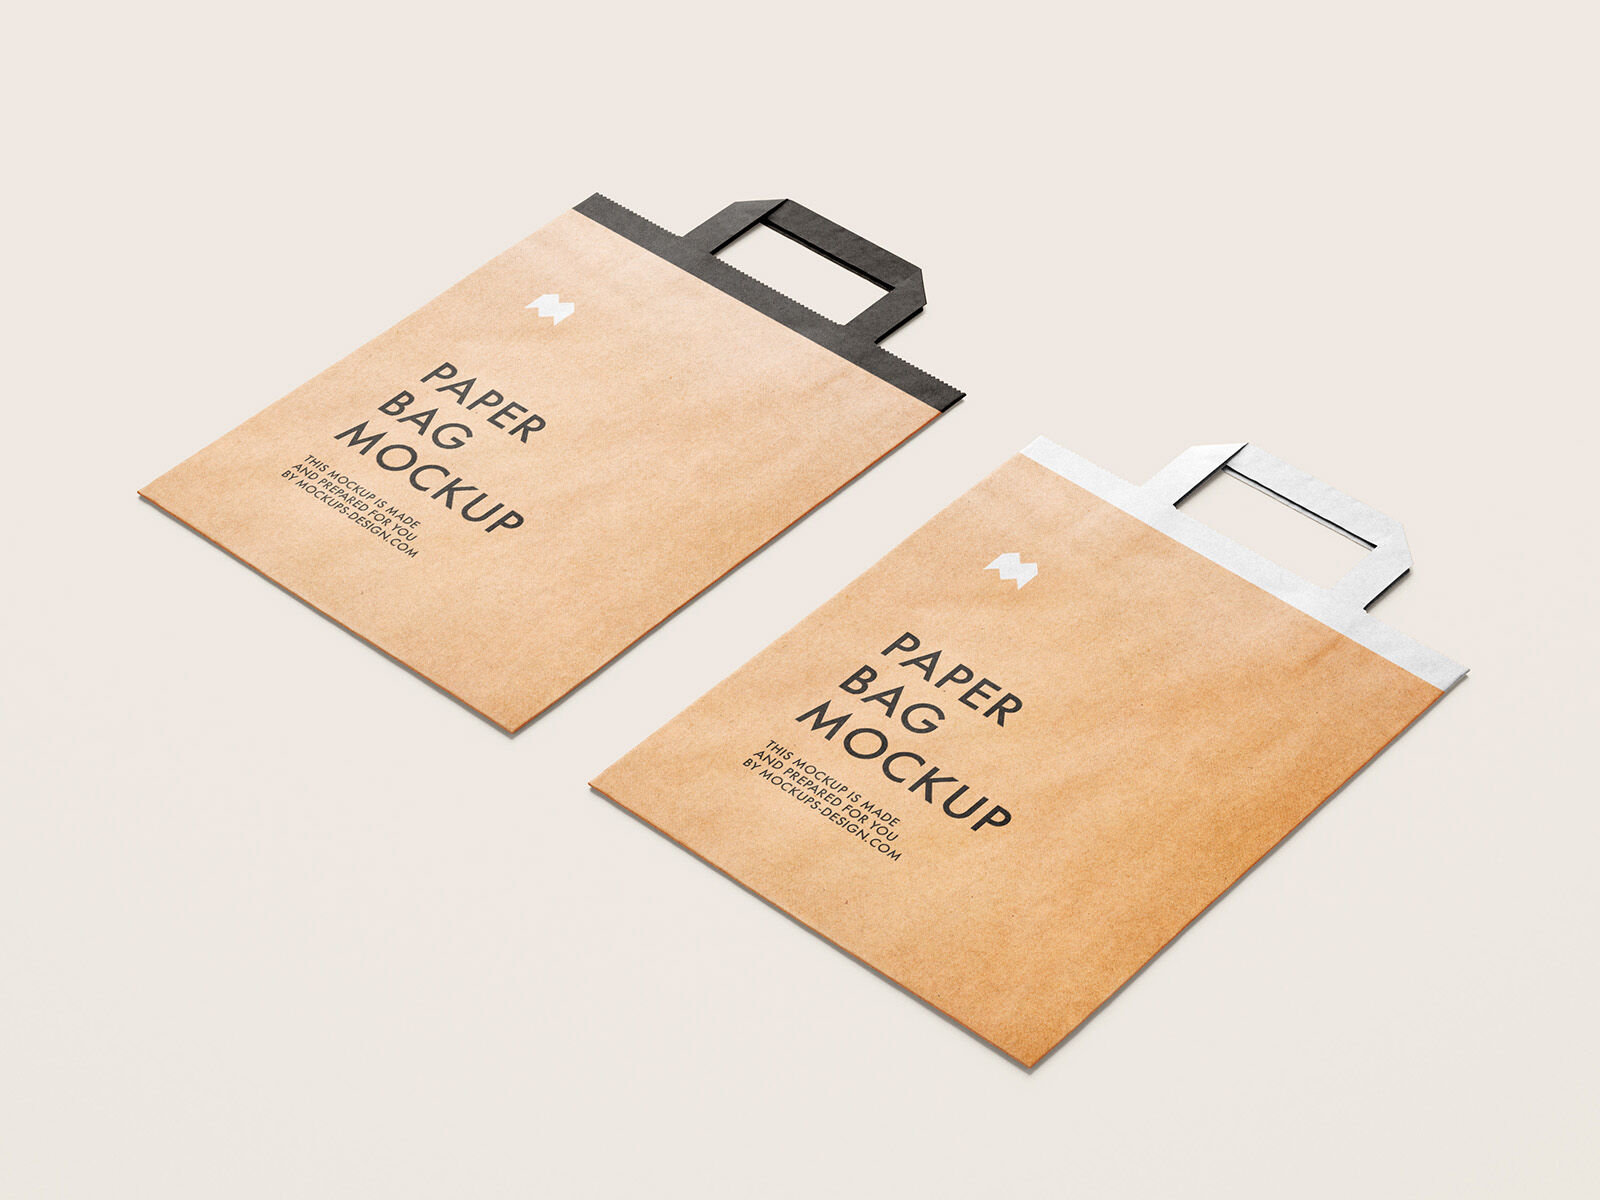 Four Mockups Showing Overhead and Perspective View of Flattened Paper Bags FREE PSD